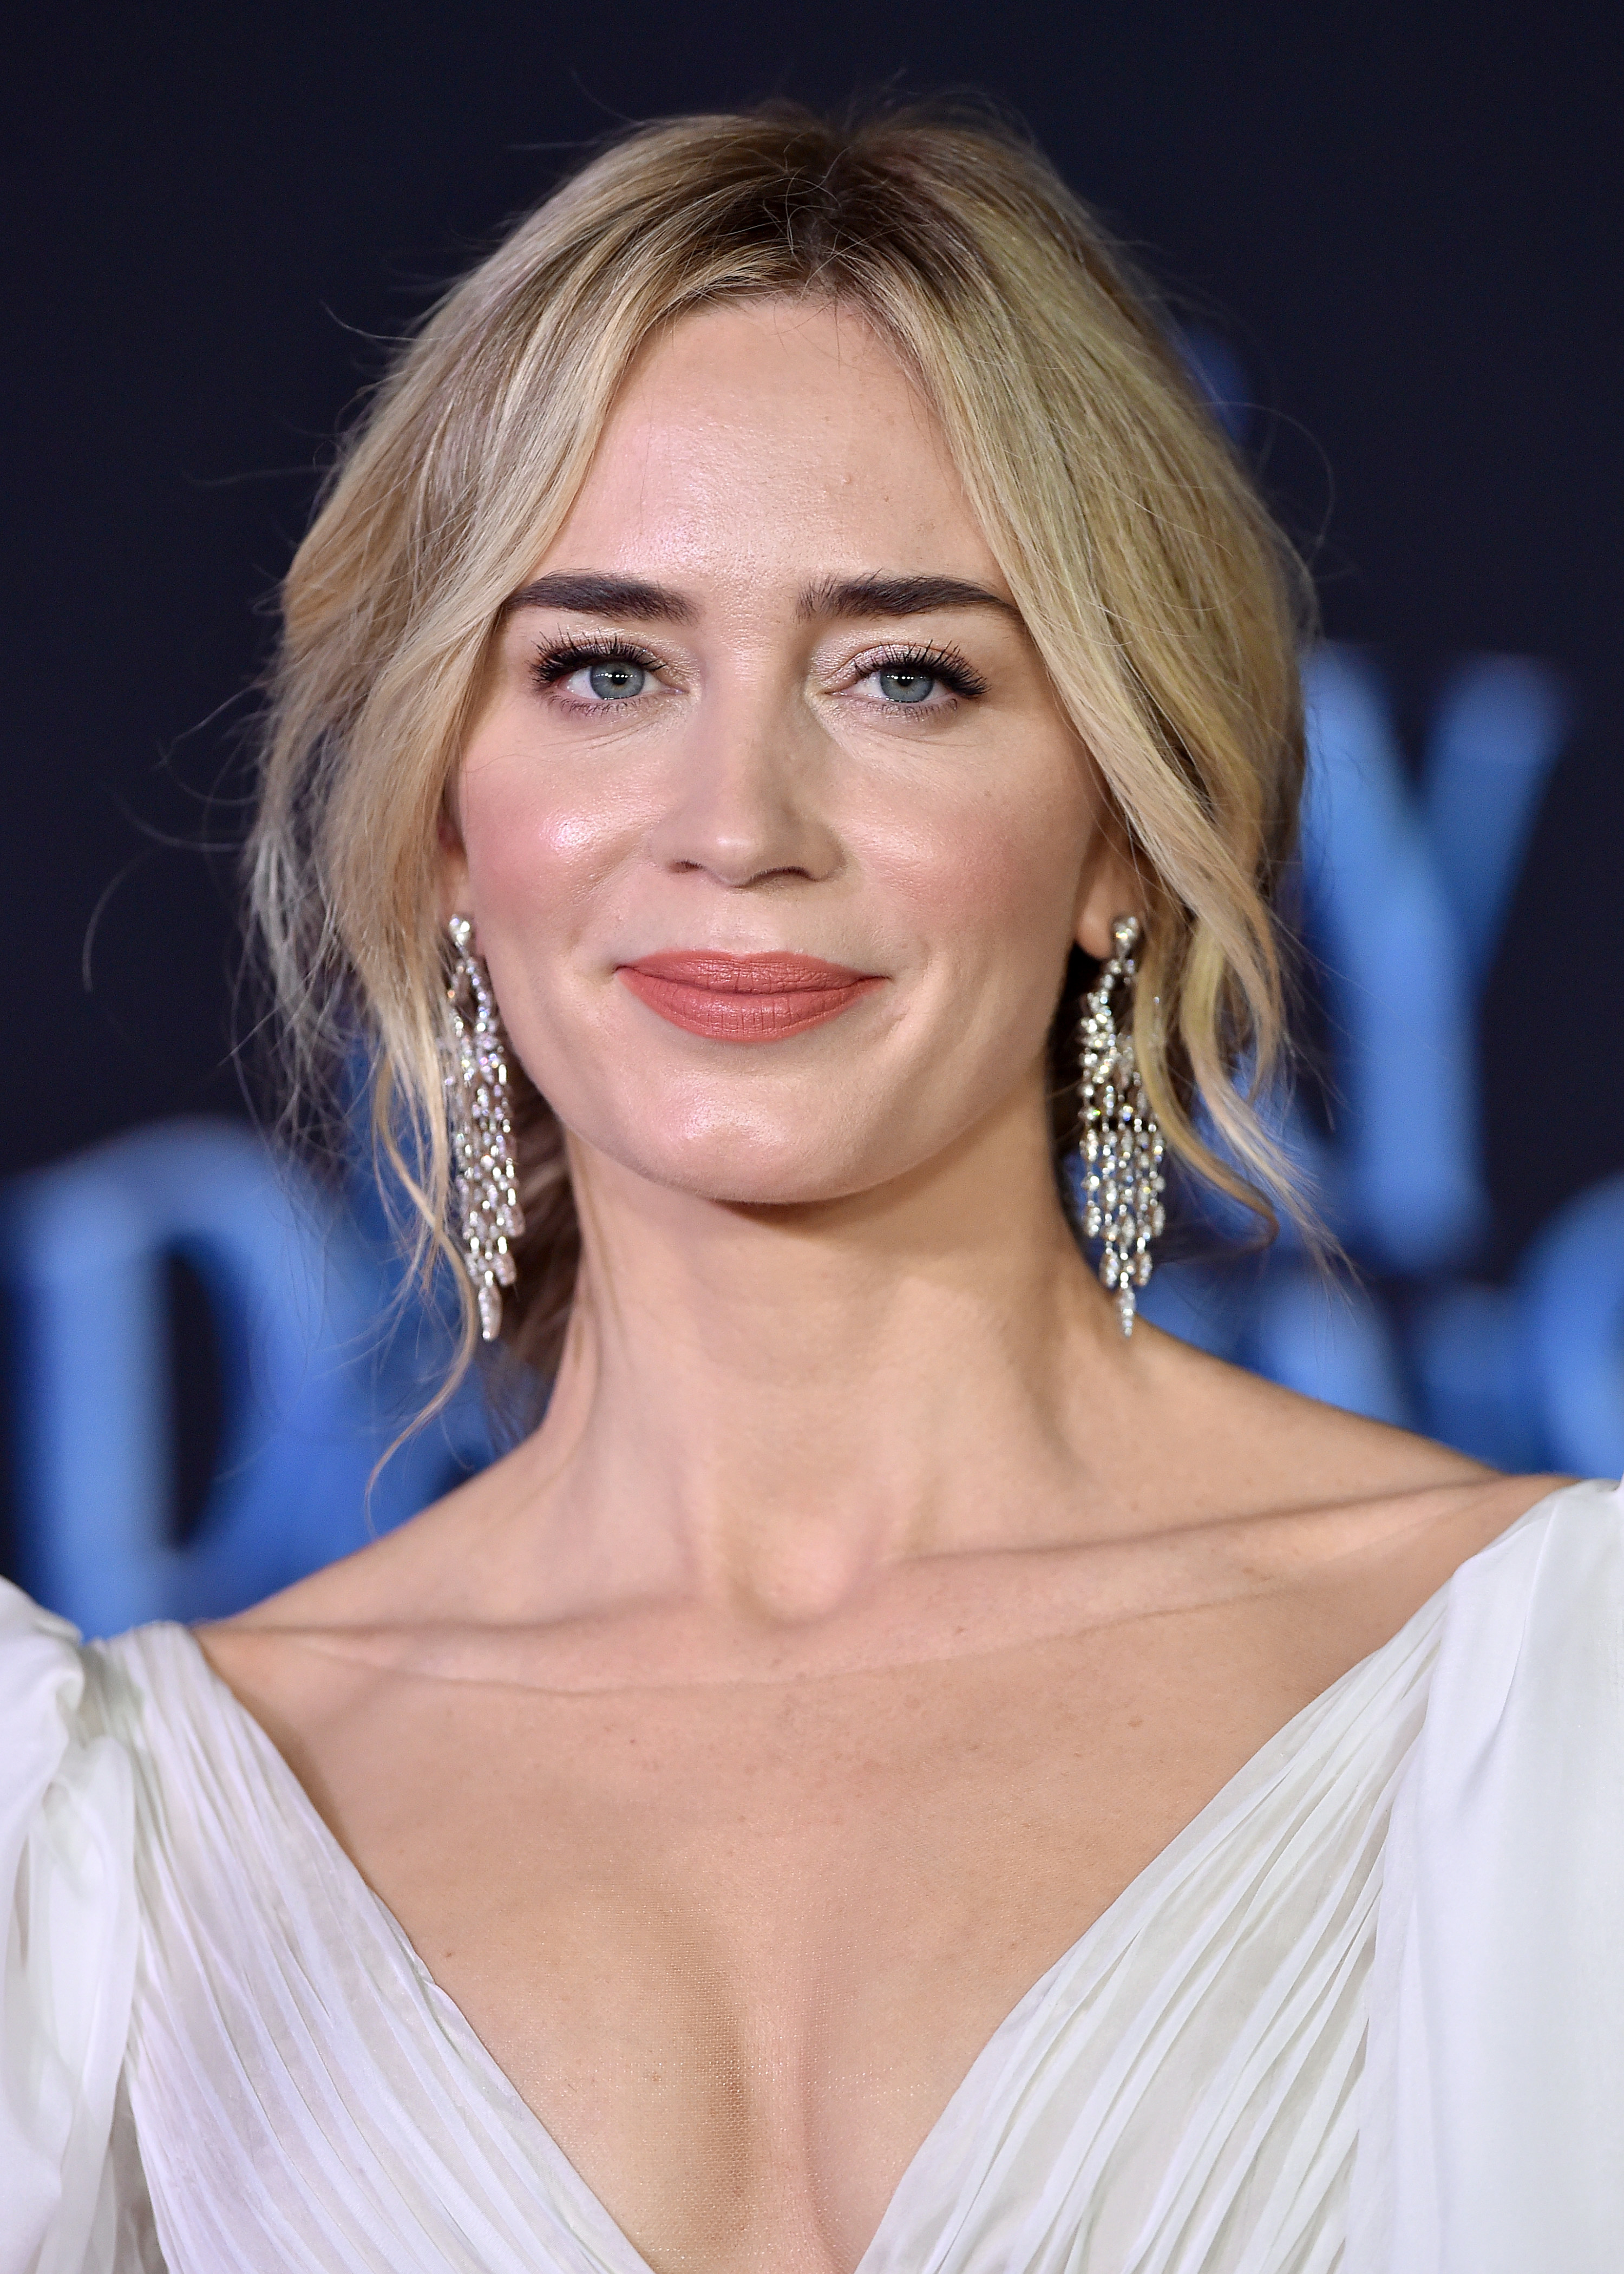 Emily Blunt at the premiere of "Mary Poppins Returns" in Los Angeles, 2018 | Source: Getty Images